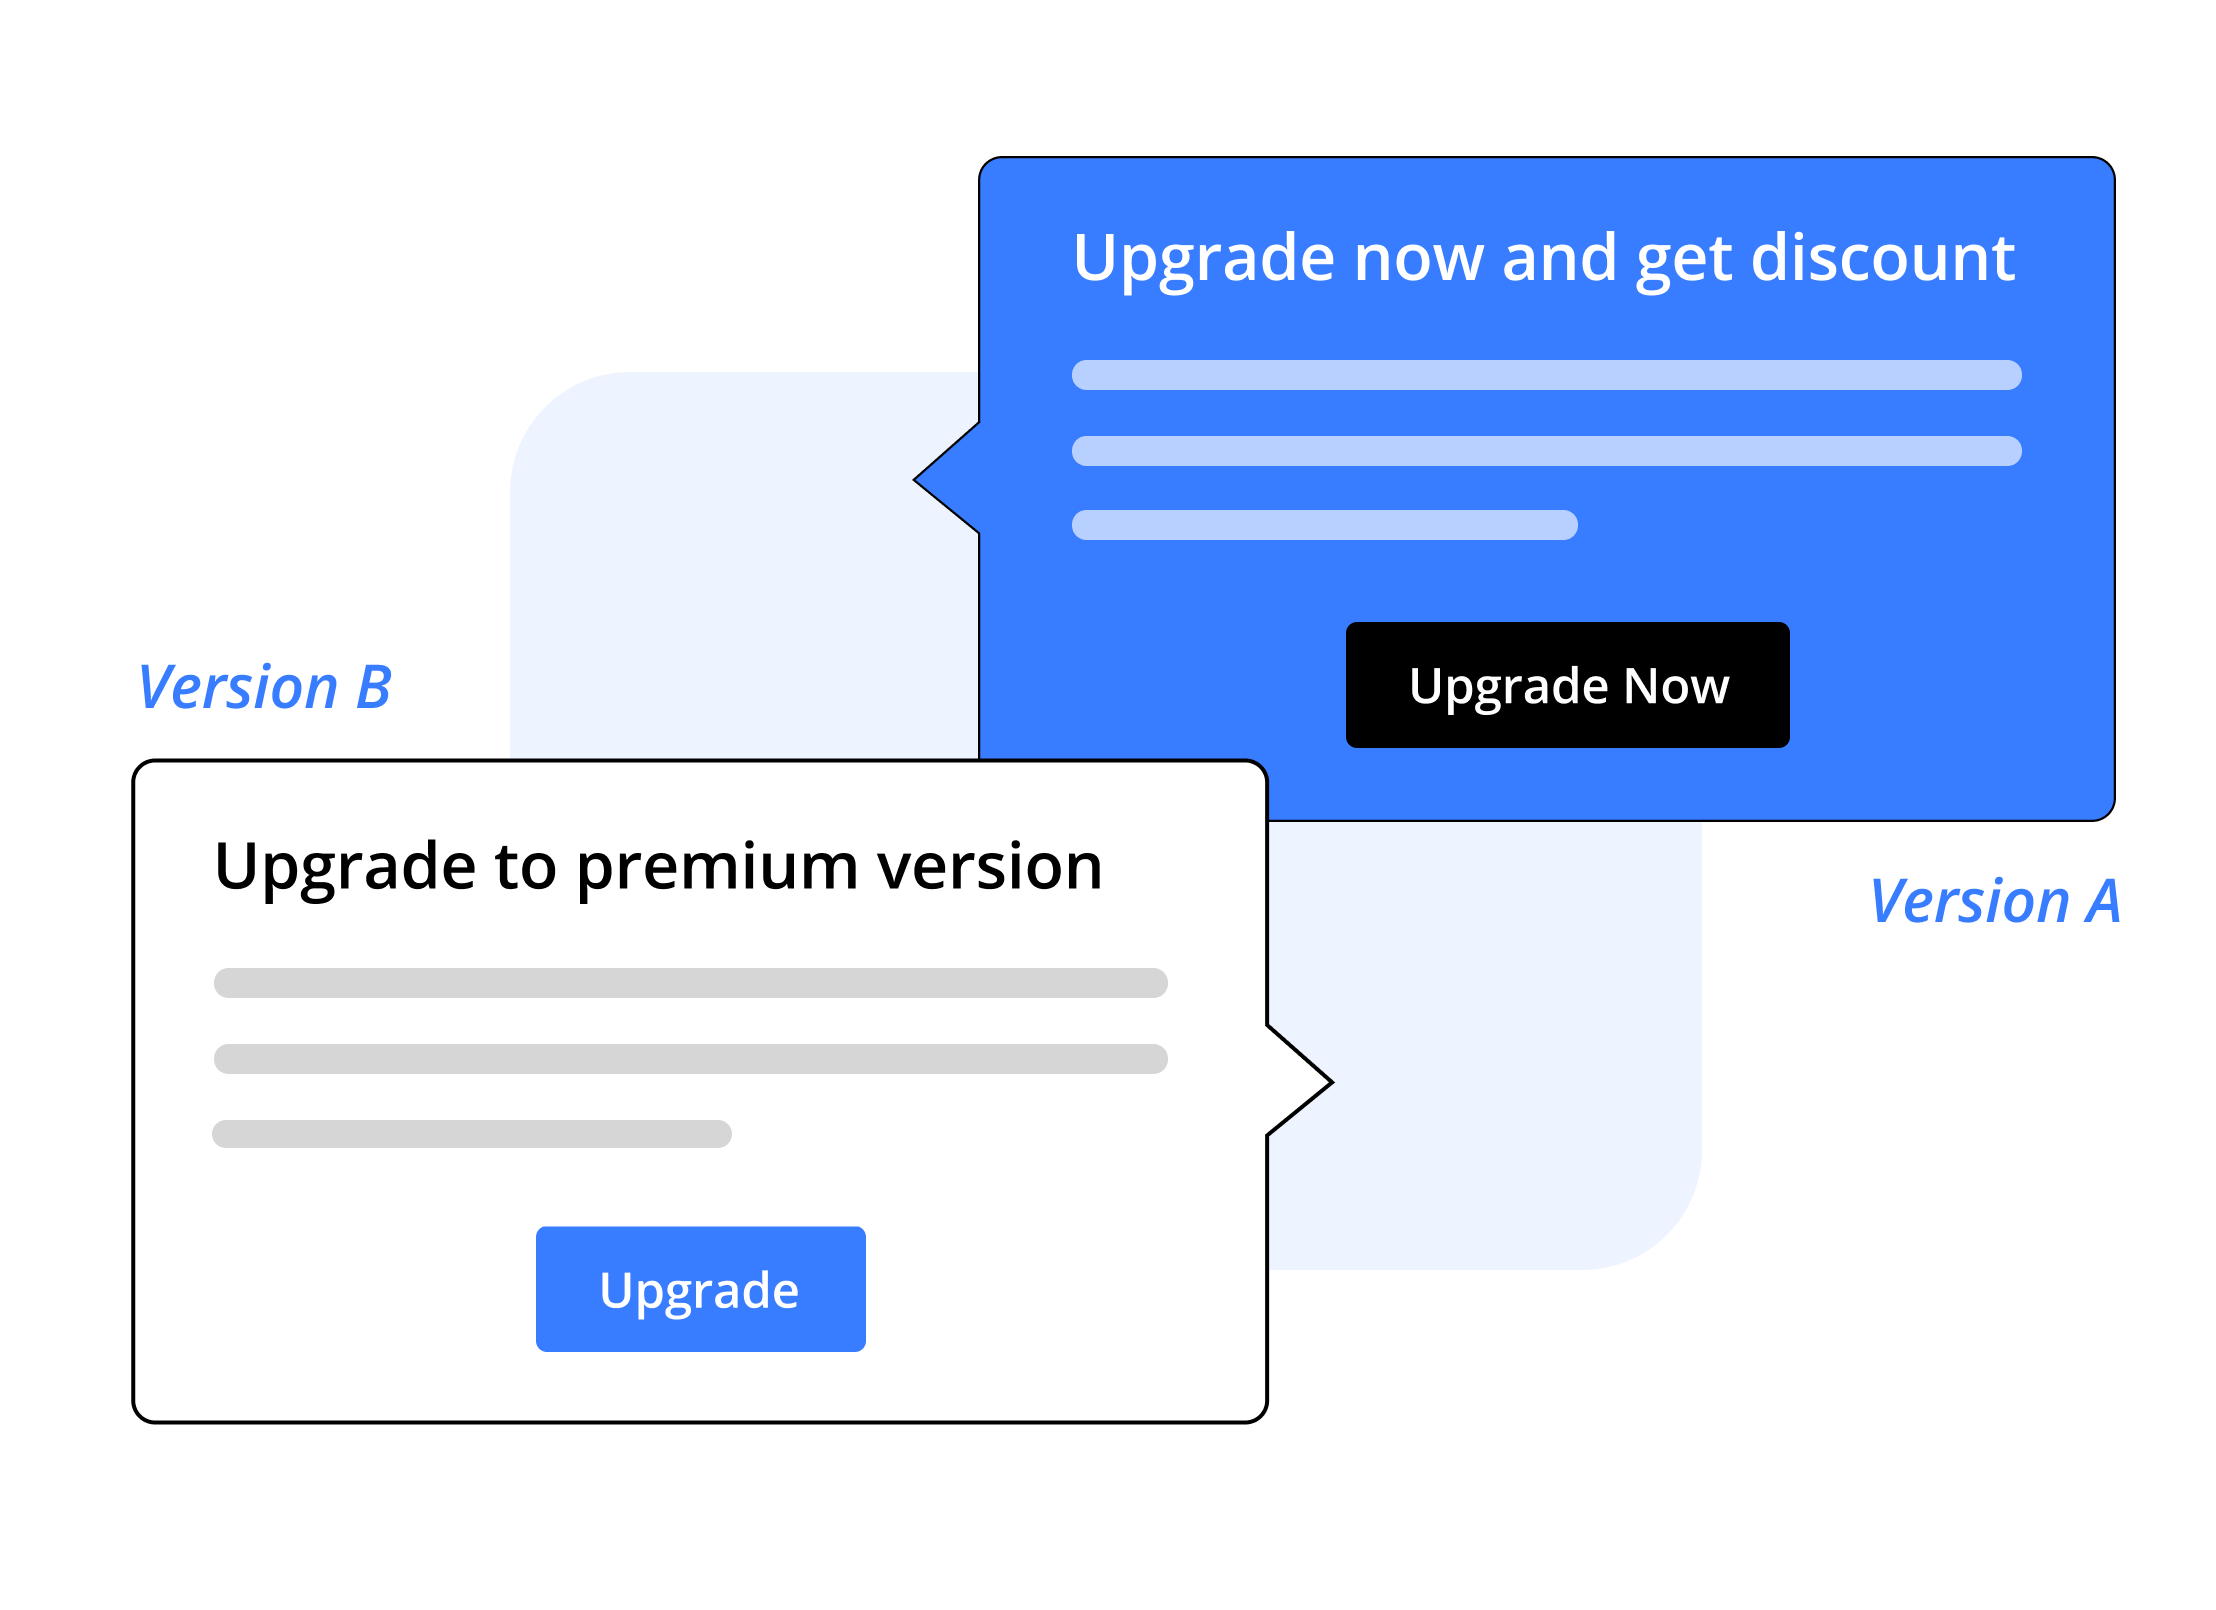 Feature adoption - fast and cheap monetization experiments